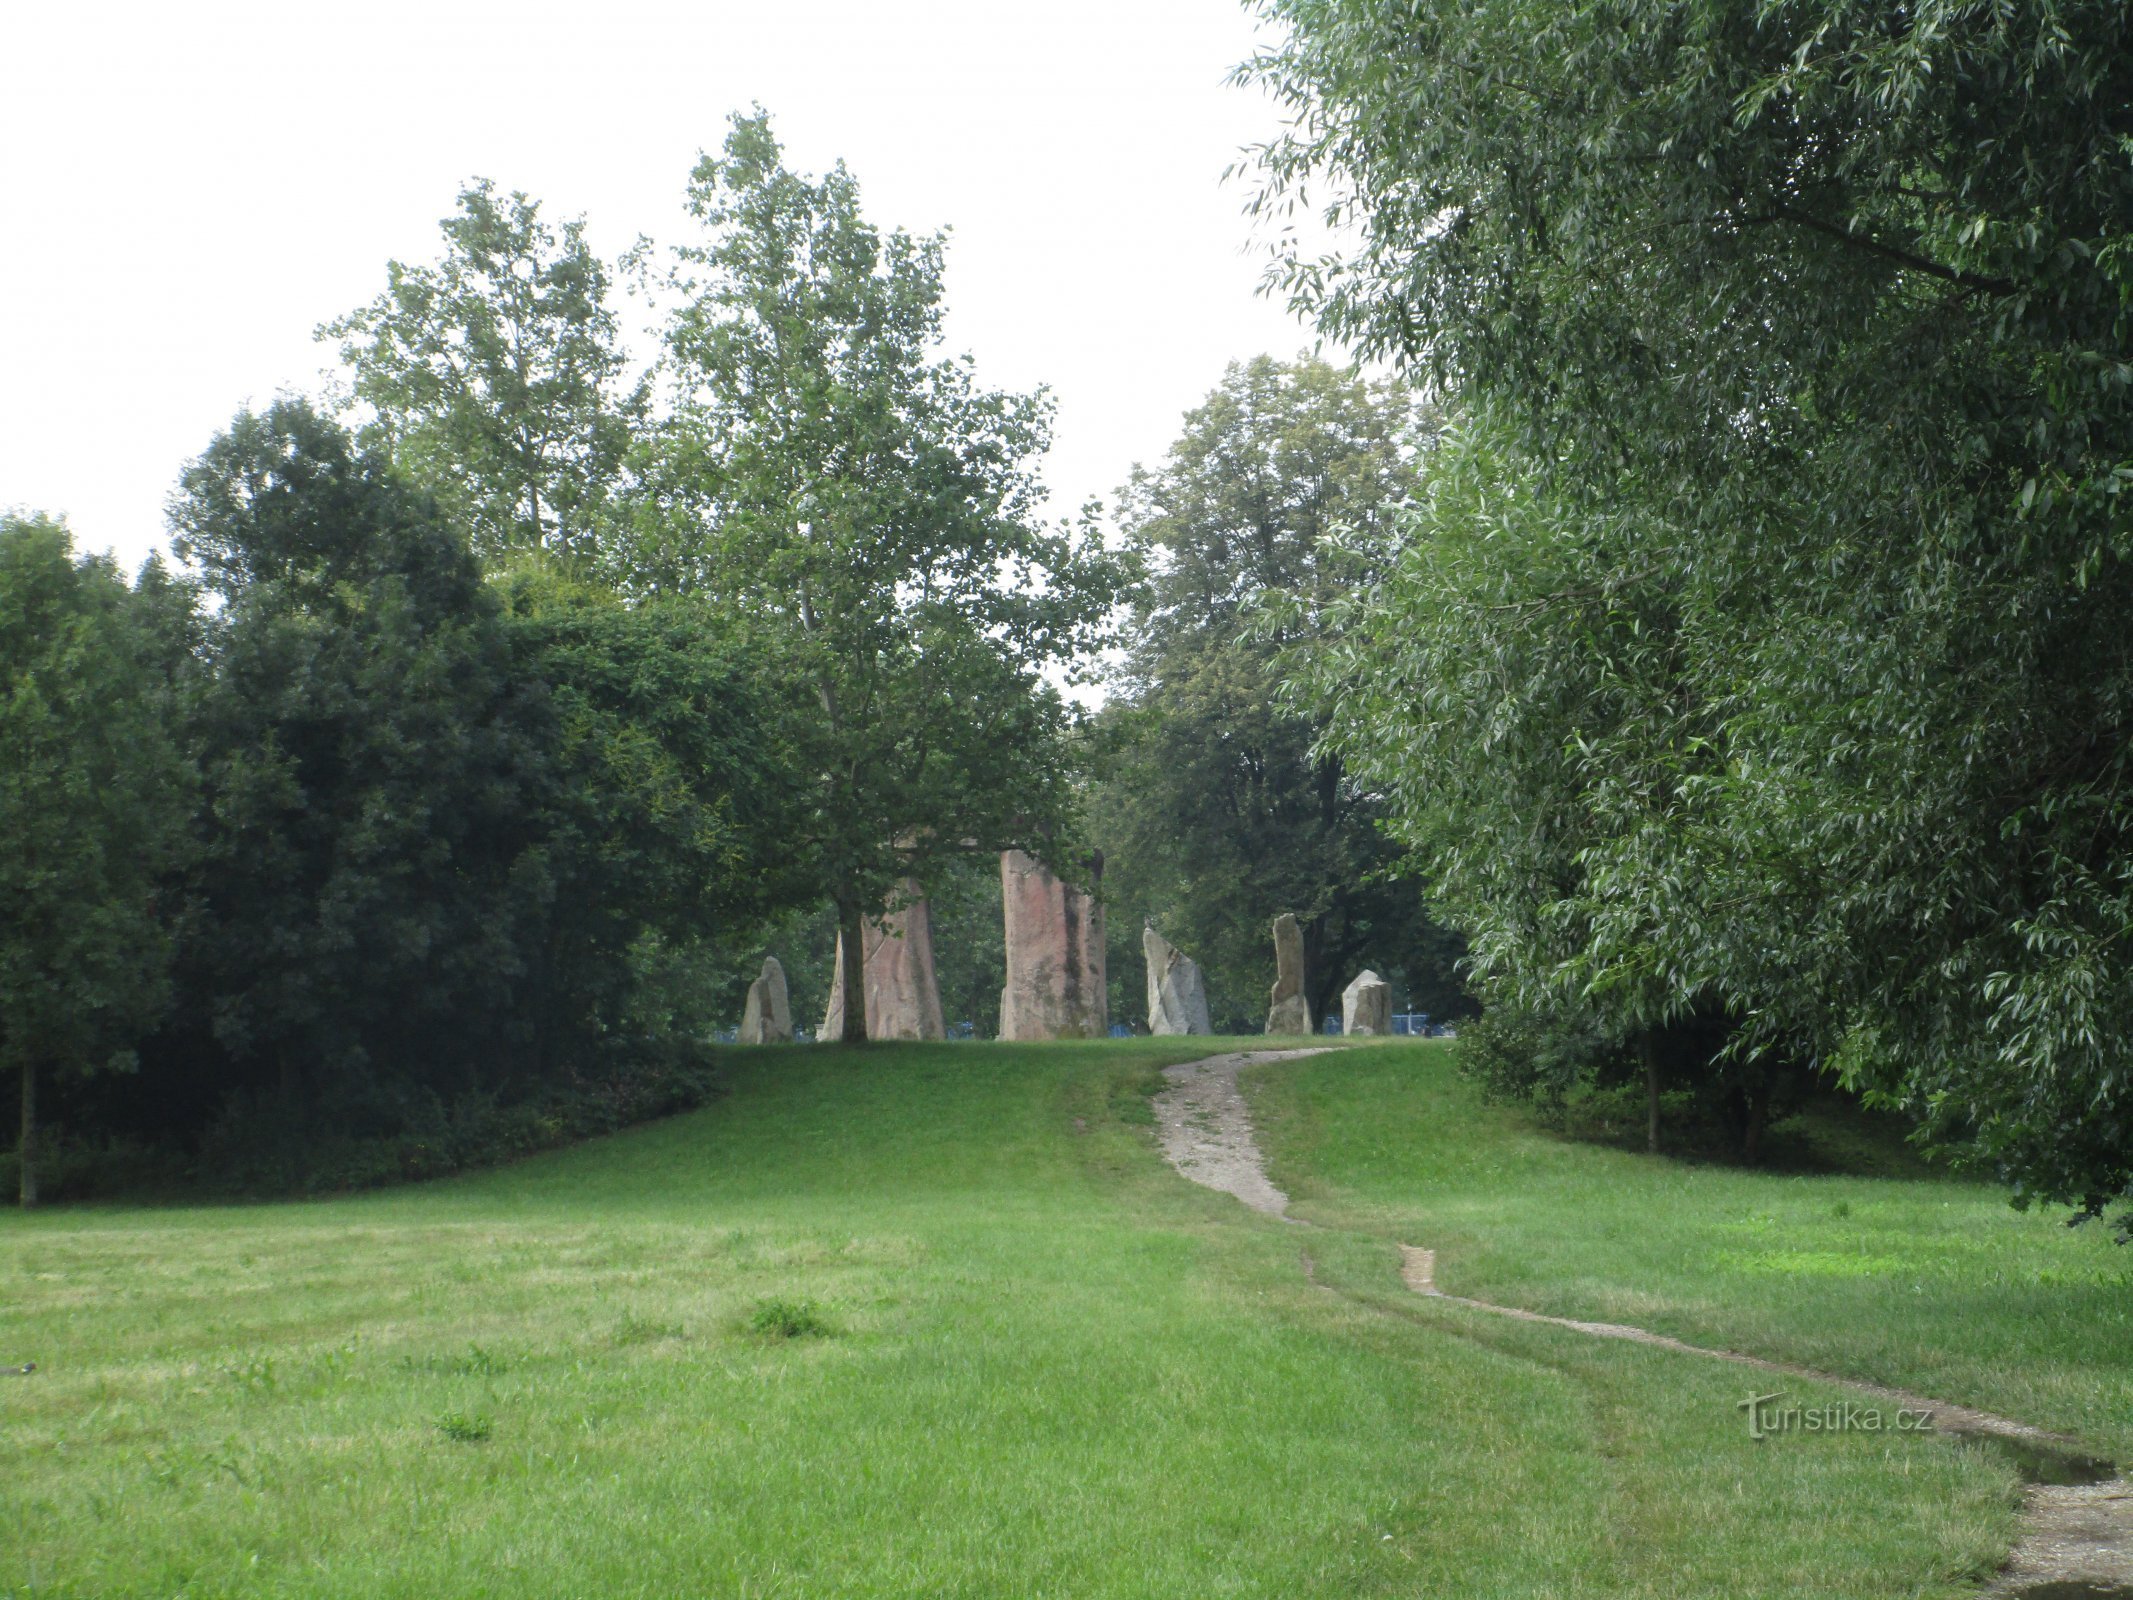 view of the Stonehenge replica from Soutok Forest Park